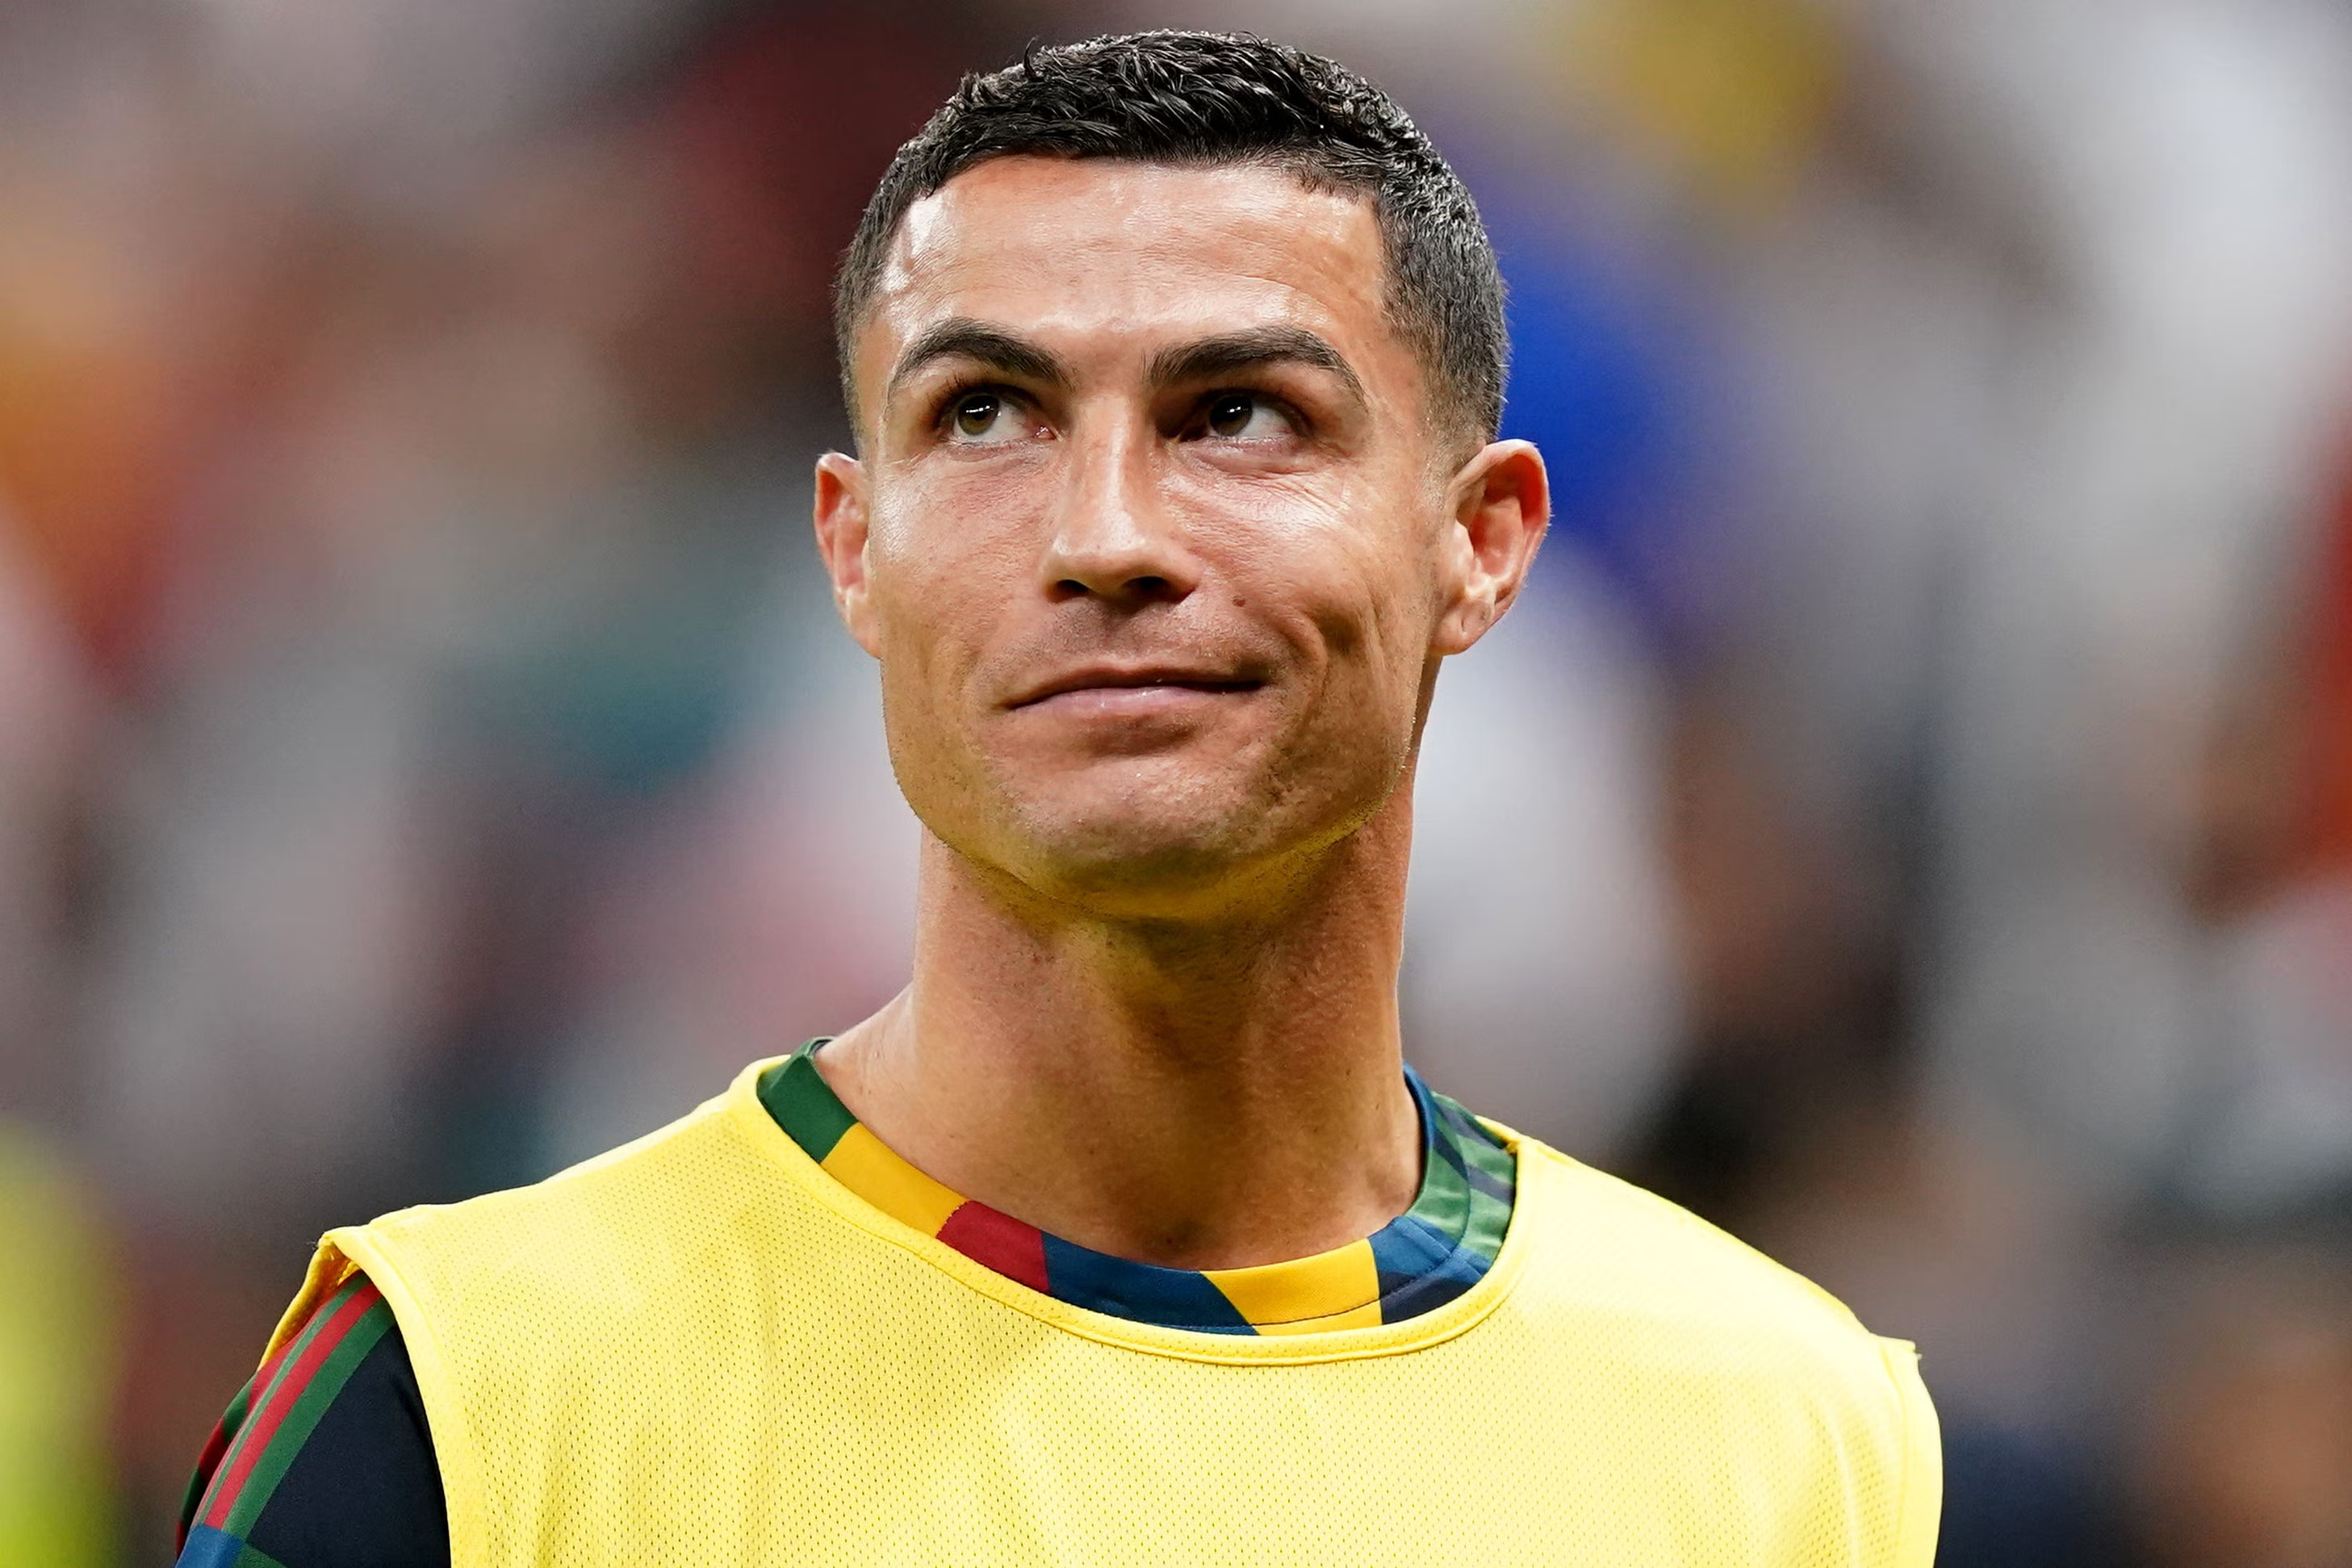 Cristiano Ronaldo Passes Lie Detector Test With Questions About His Career